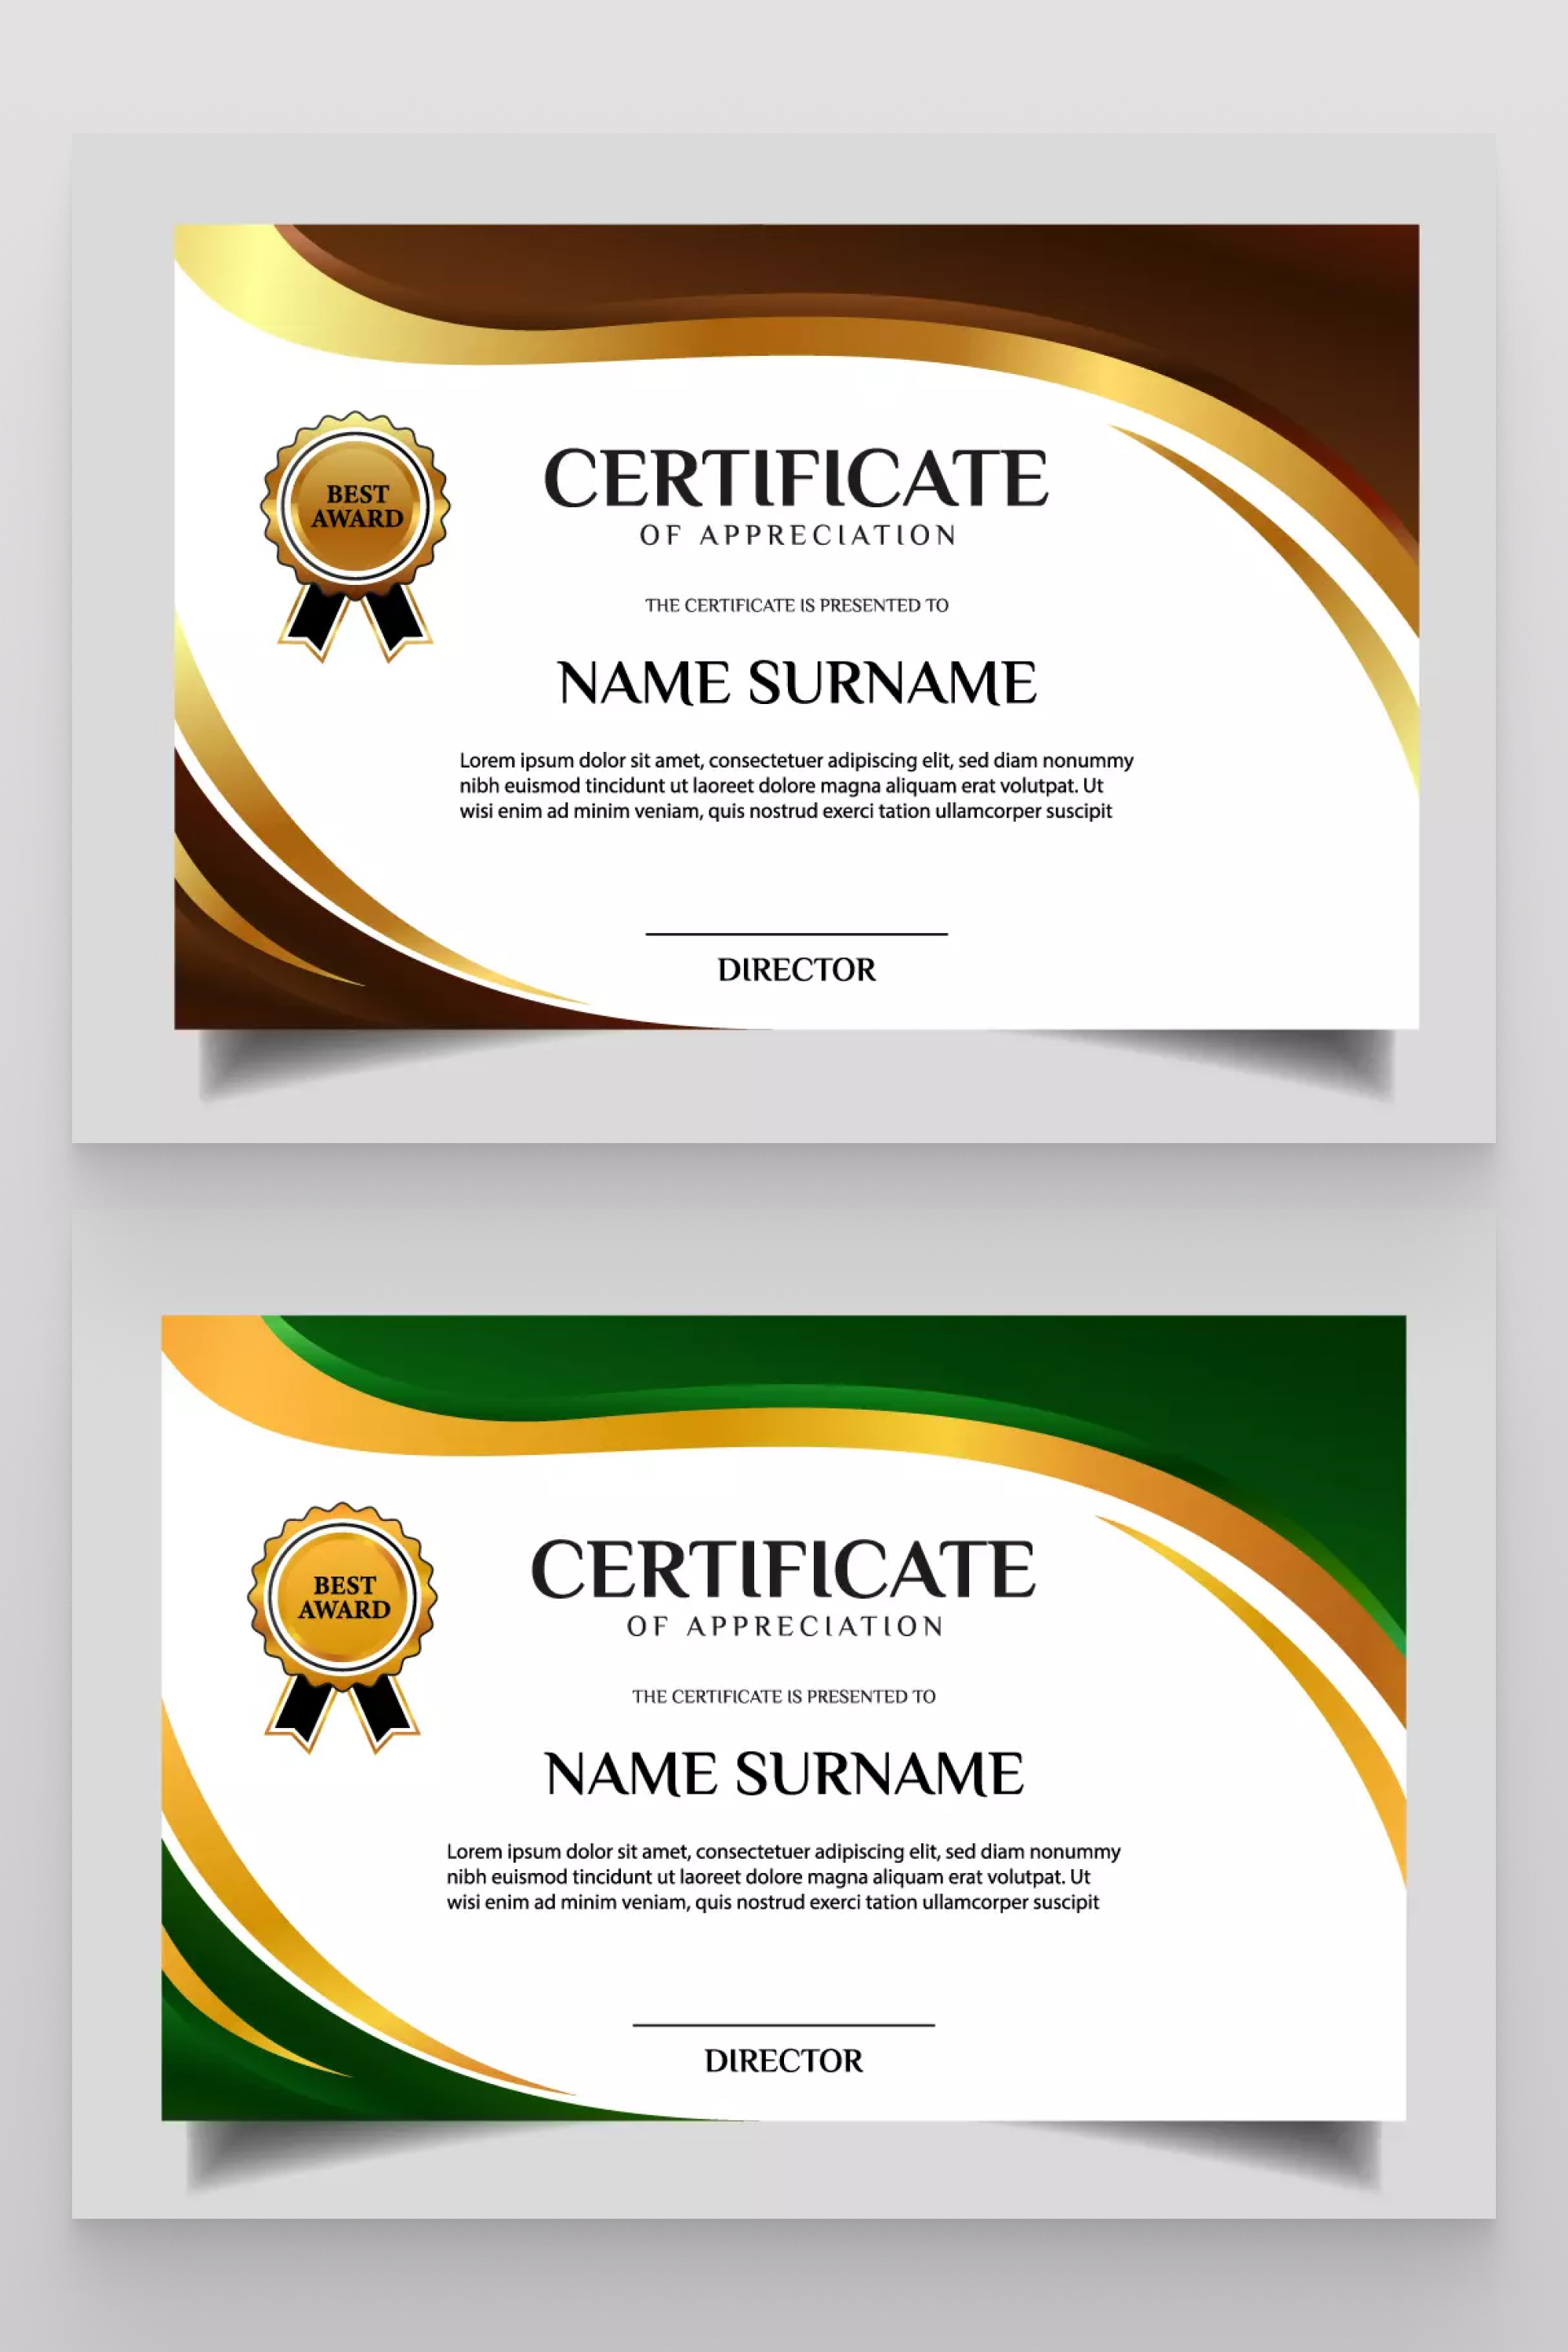 Certificate with wavy color design, large seal and enough space for text.